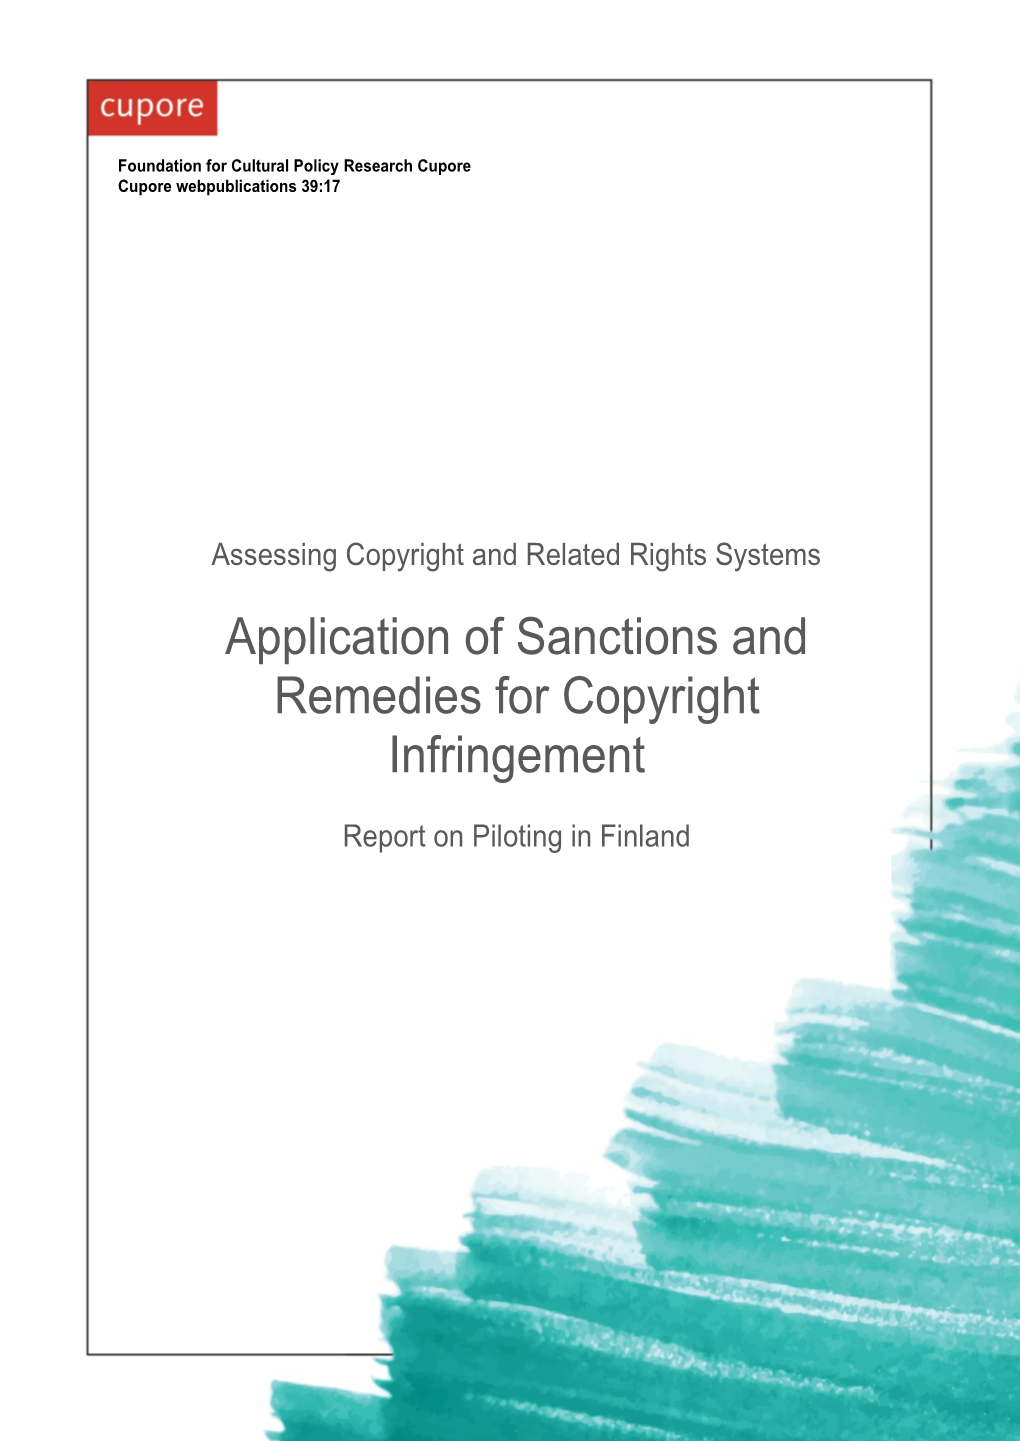 Application of Sanctions and Remedies for Copyright Infringement